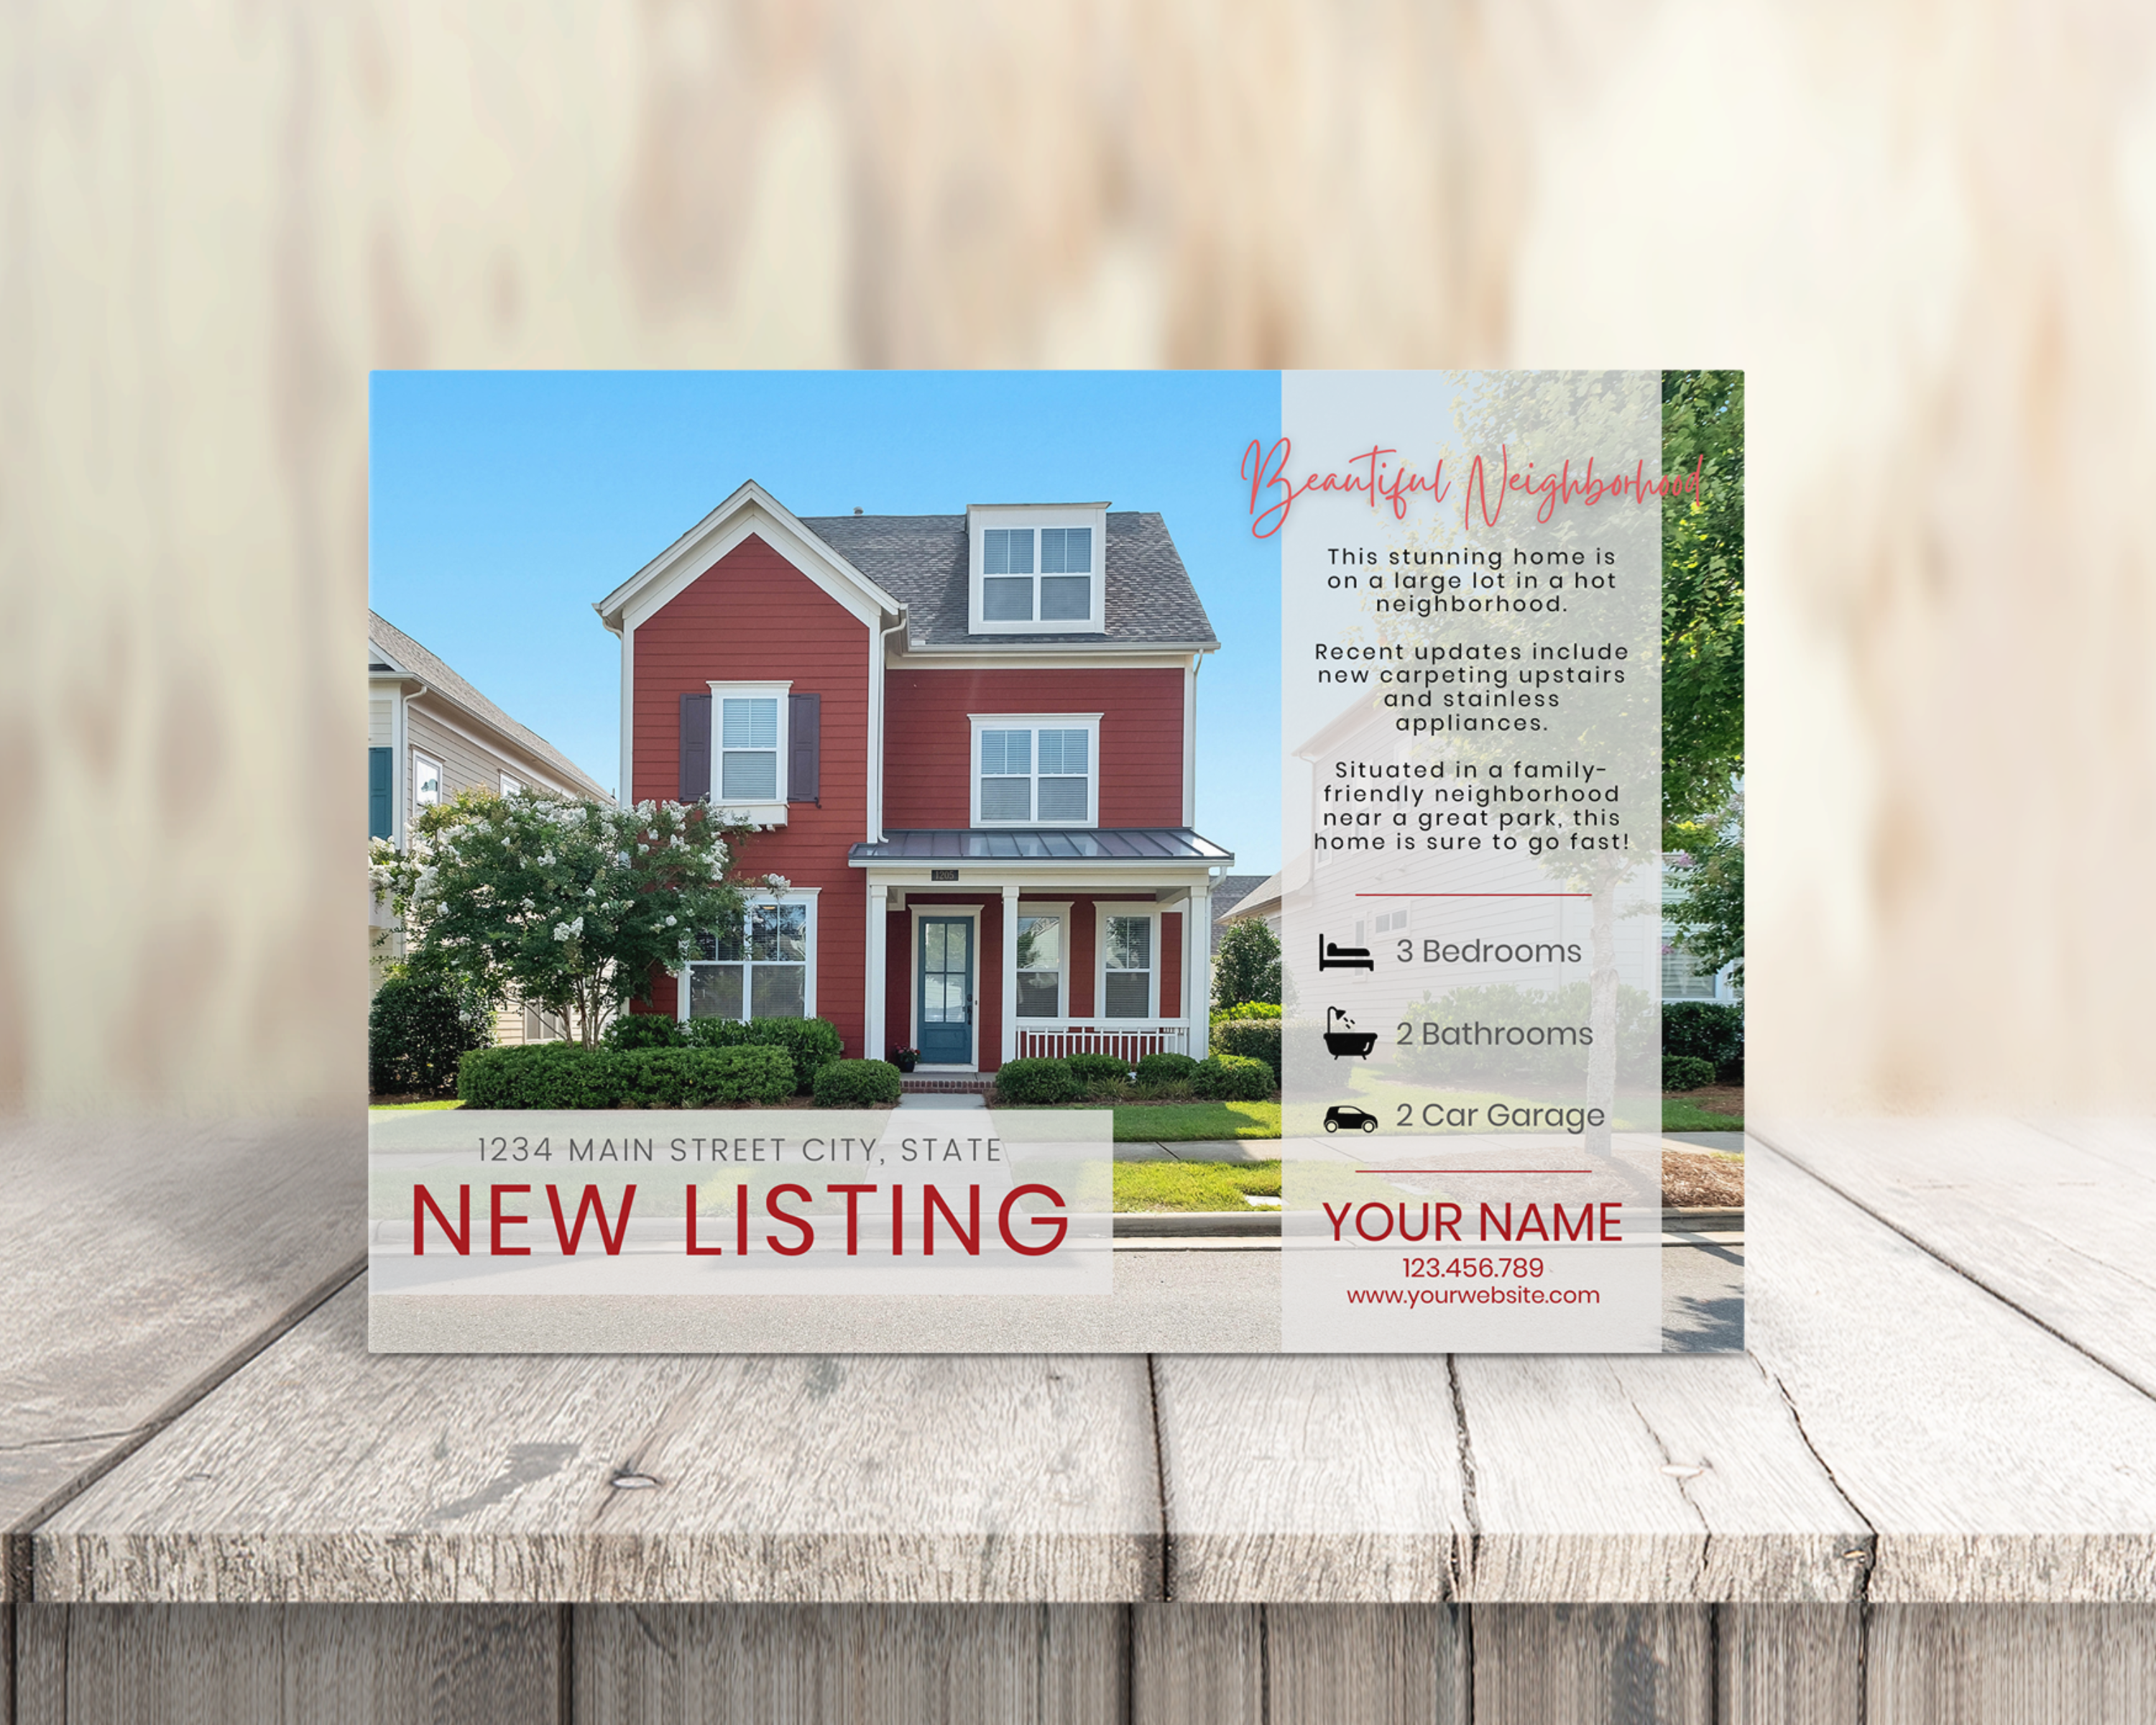 Real Estate Template – Real Estate Postcard 5 - New Listing